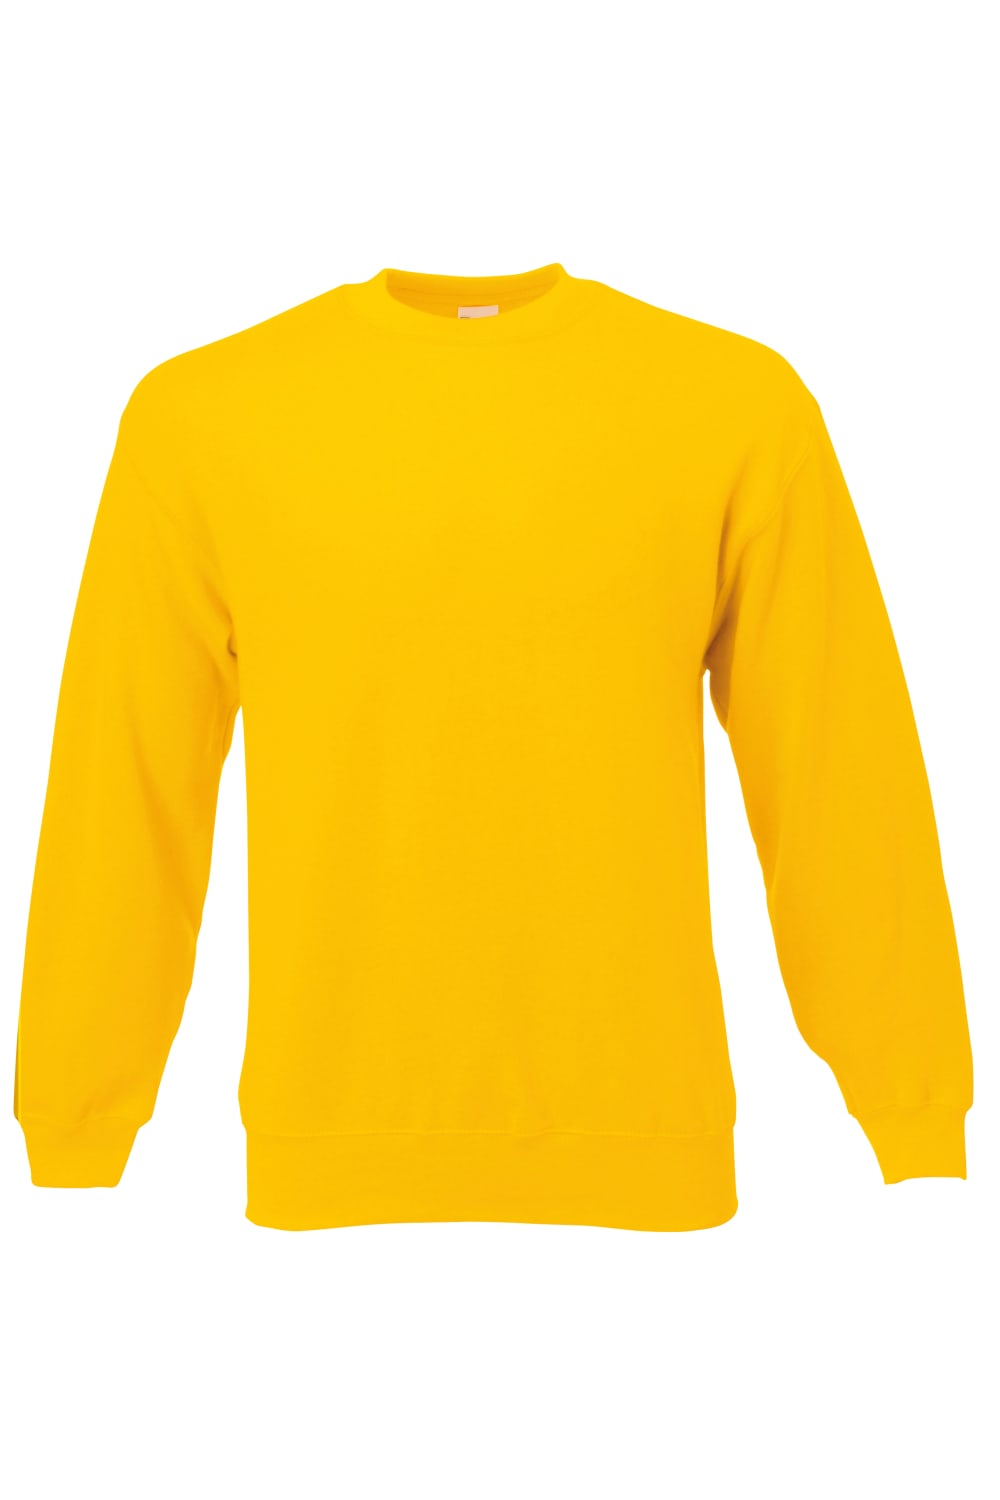 Mens Jersey Sweater (Gold)